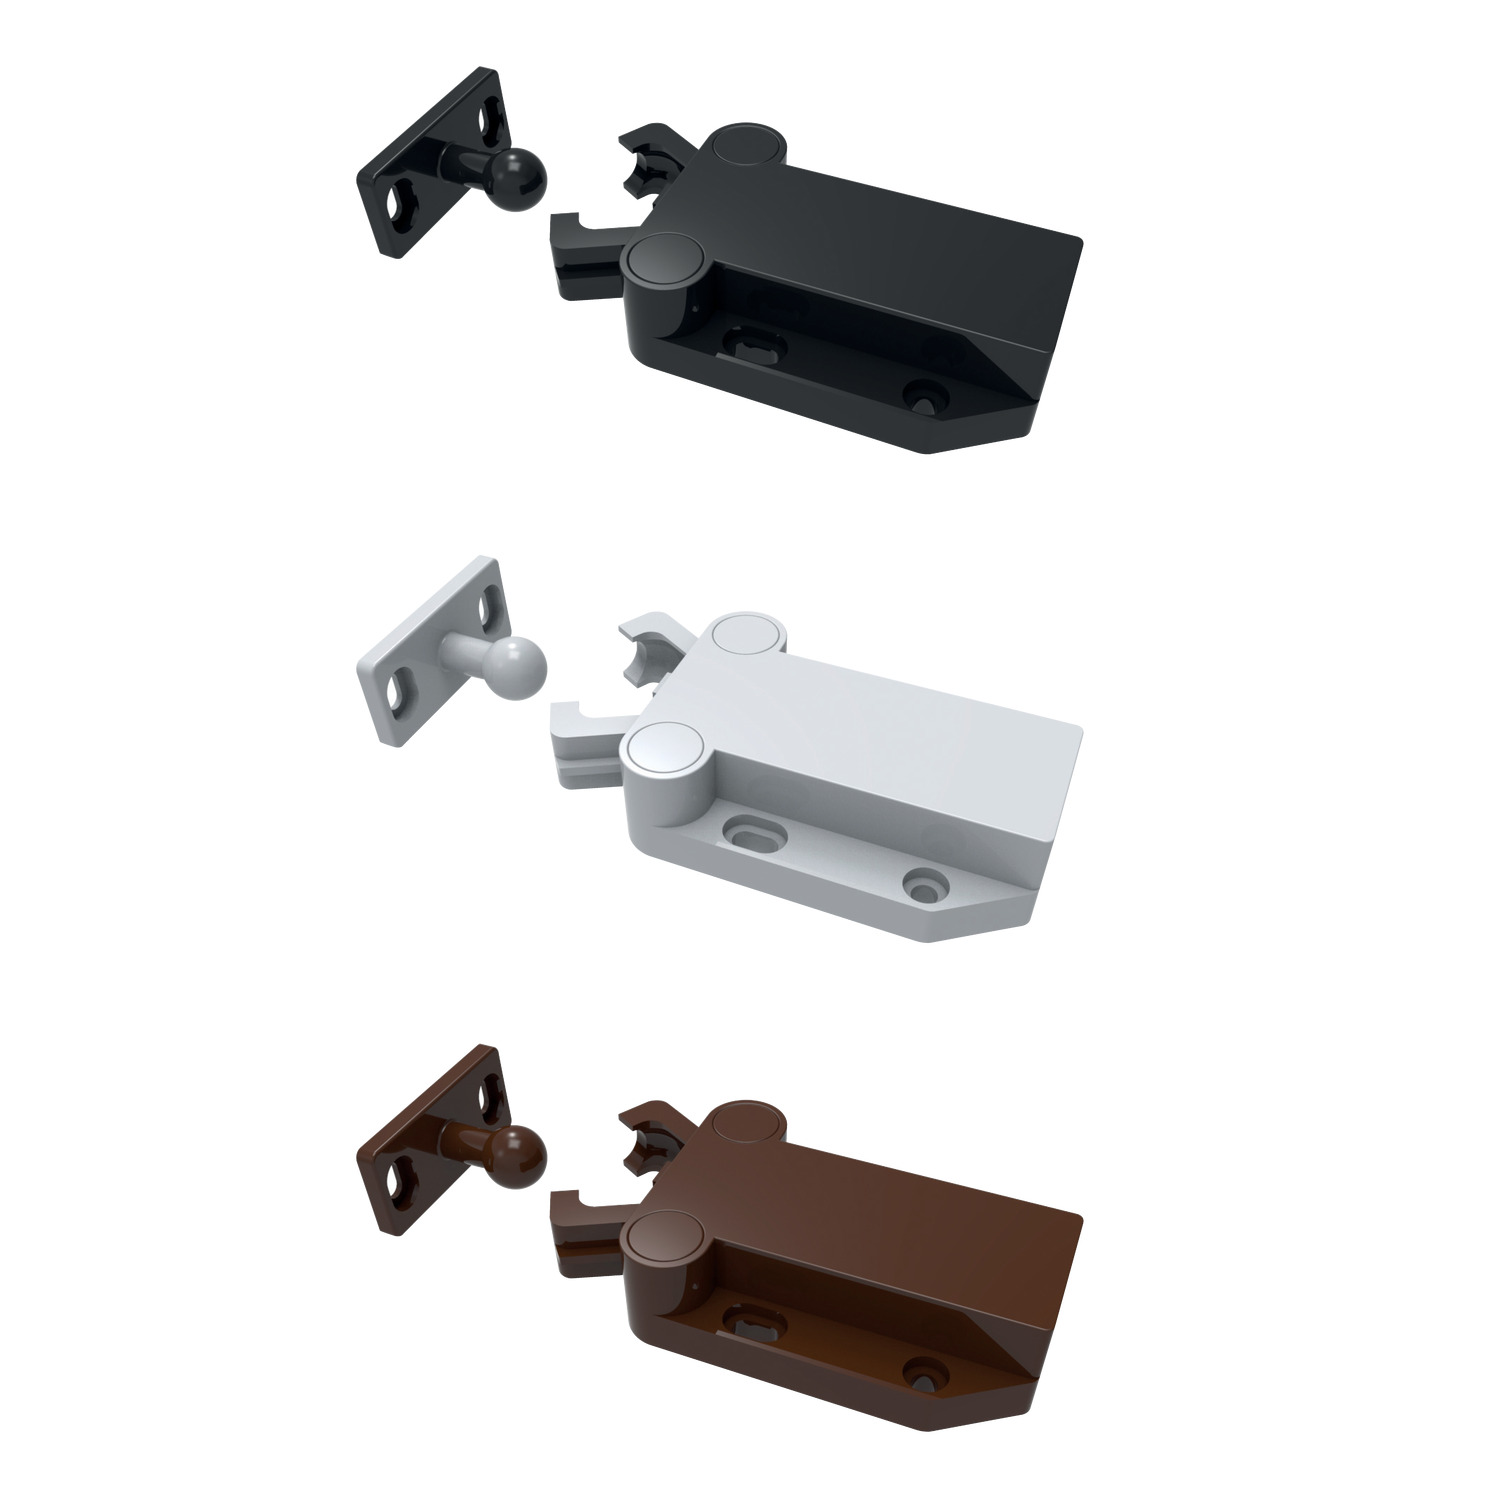 Touch Latches Claw like mechanical latch, providing upto 4Kgf retaining force. Easy to install.